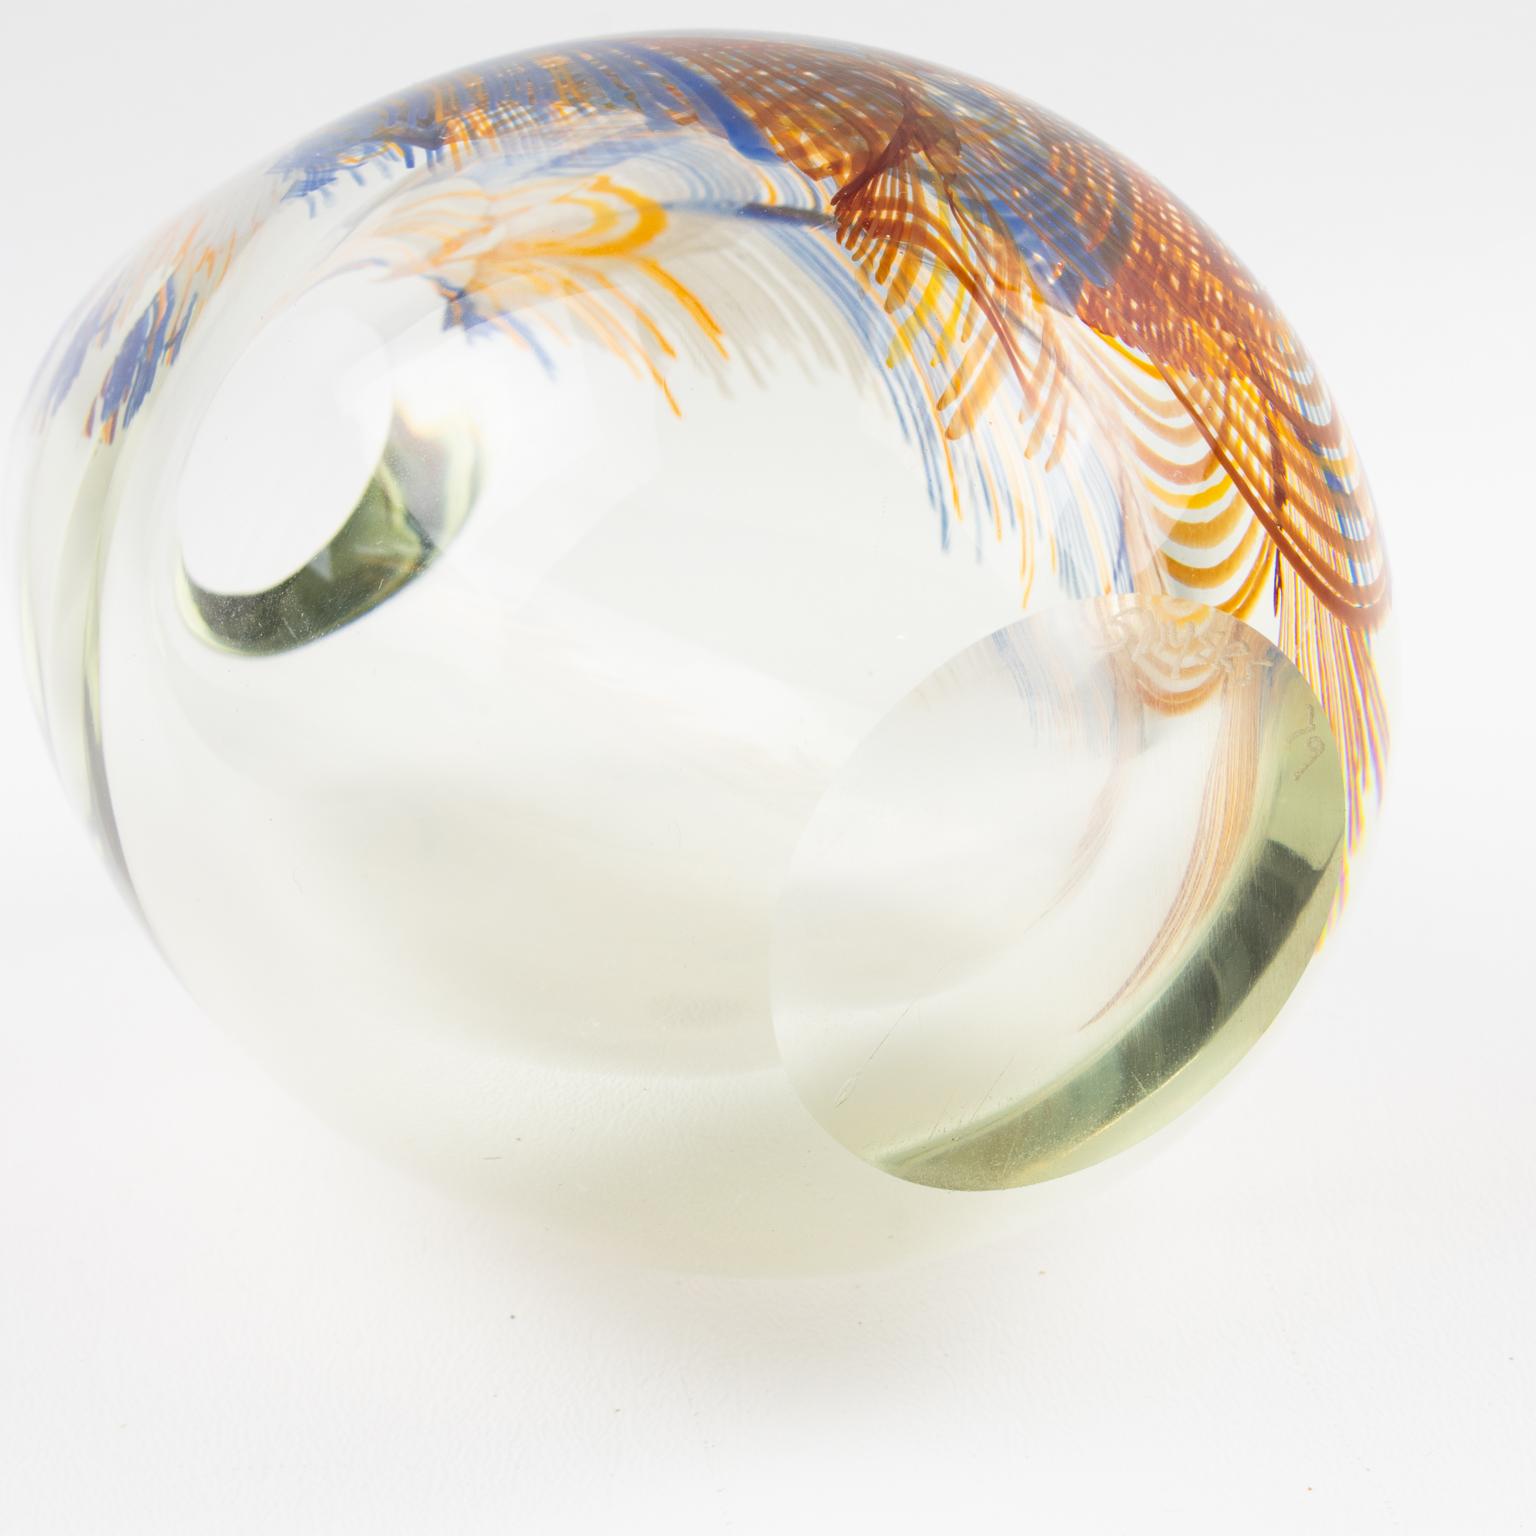 Late 20th Century Stephen Smyers Modern Blown Art Glass Vase Abstract Feather Design, 1979 For Sale